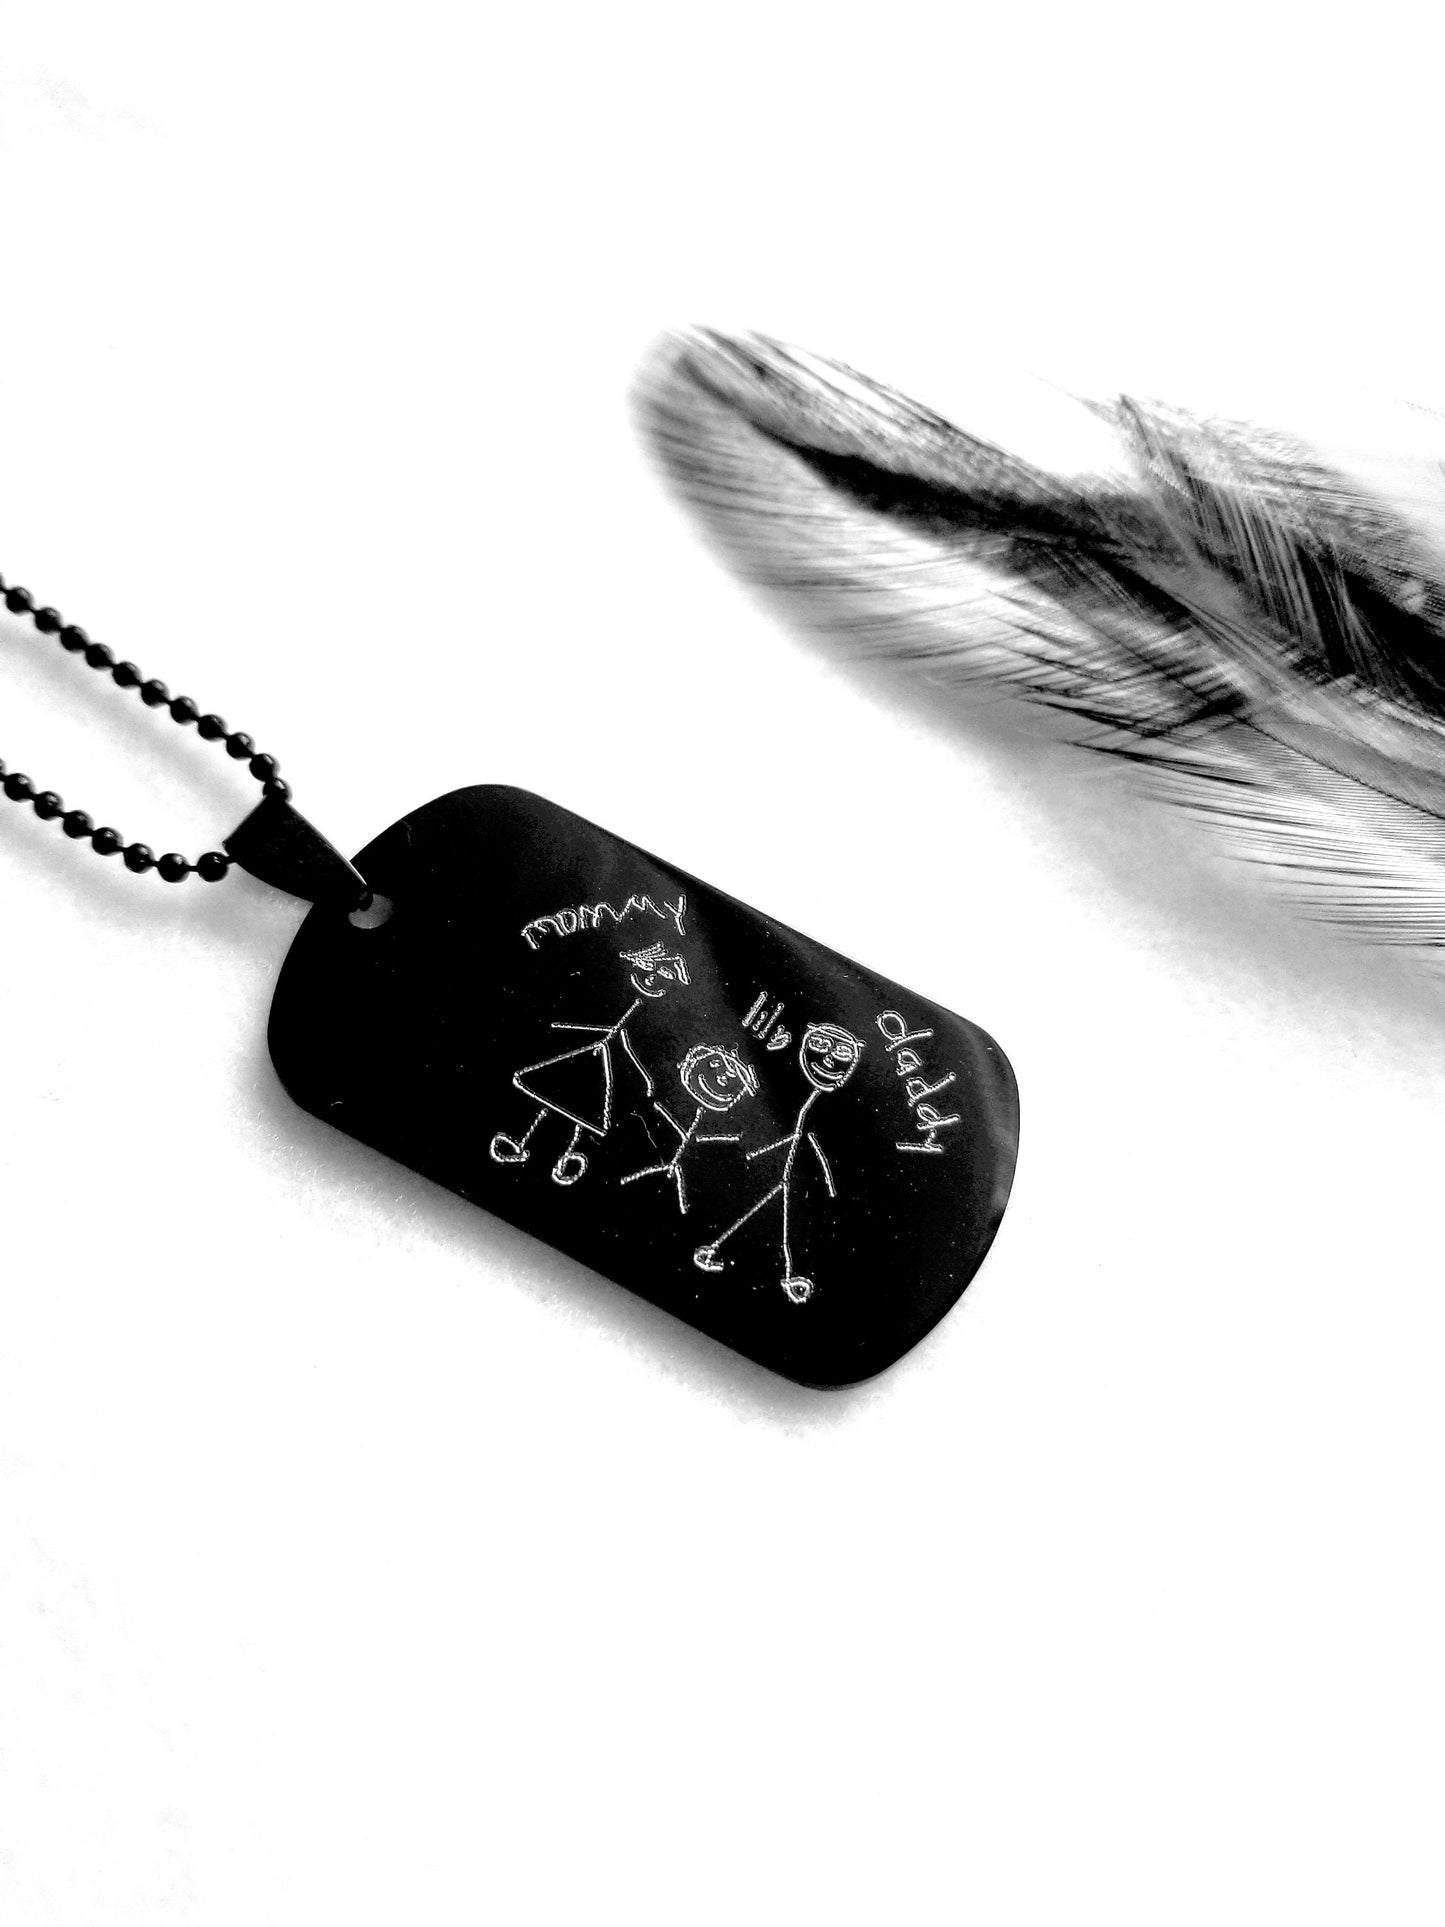 Actual Handwriting engraved on Black necklace, child drawing on military tag pendant